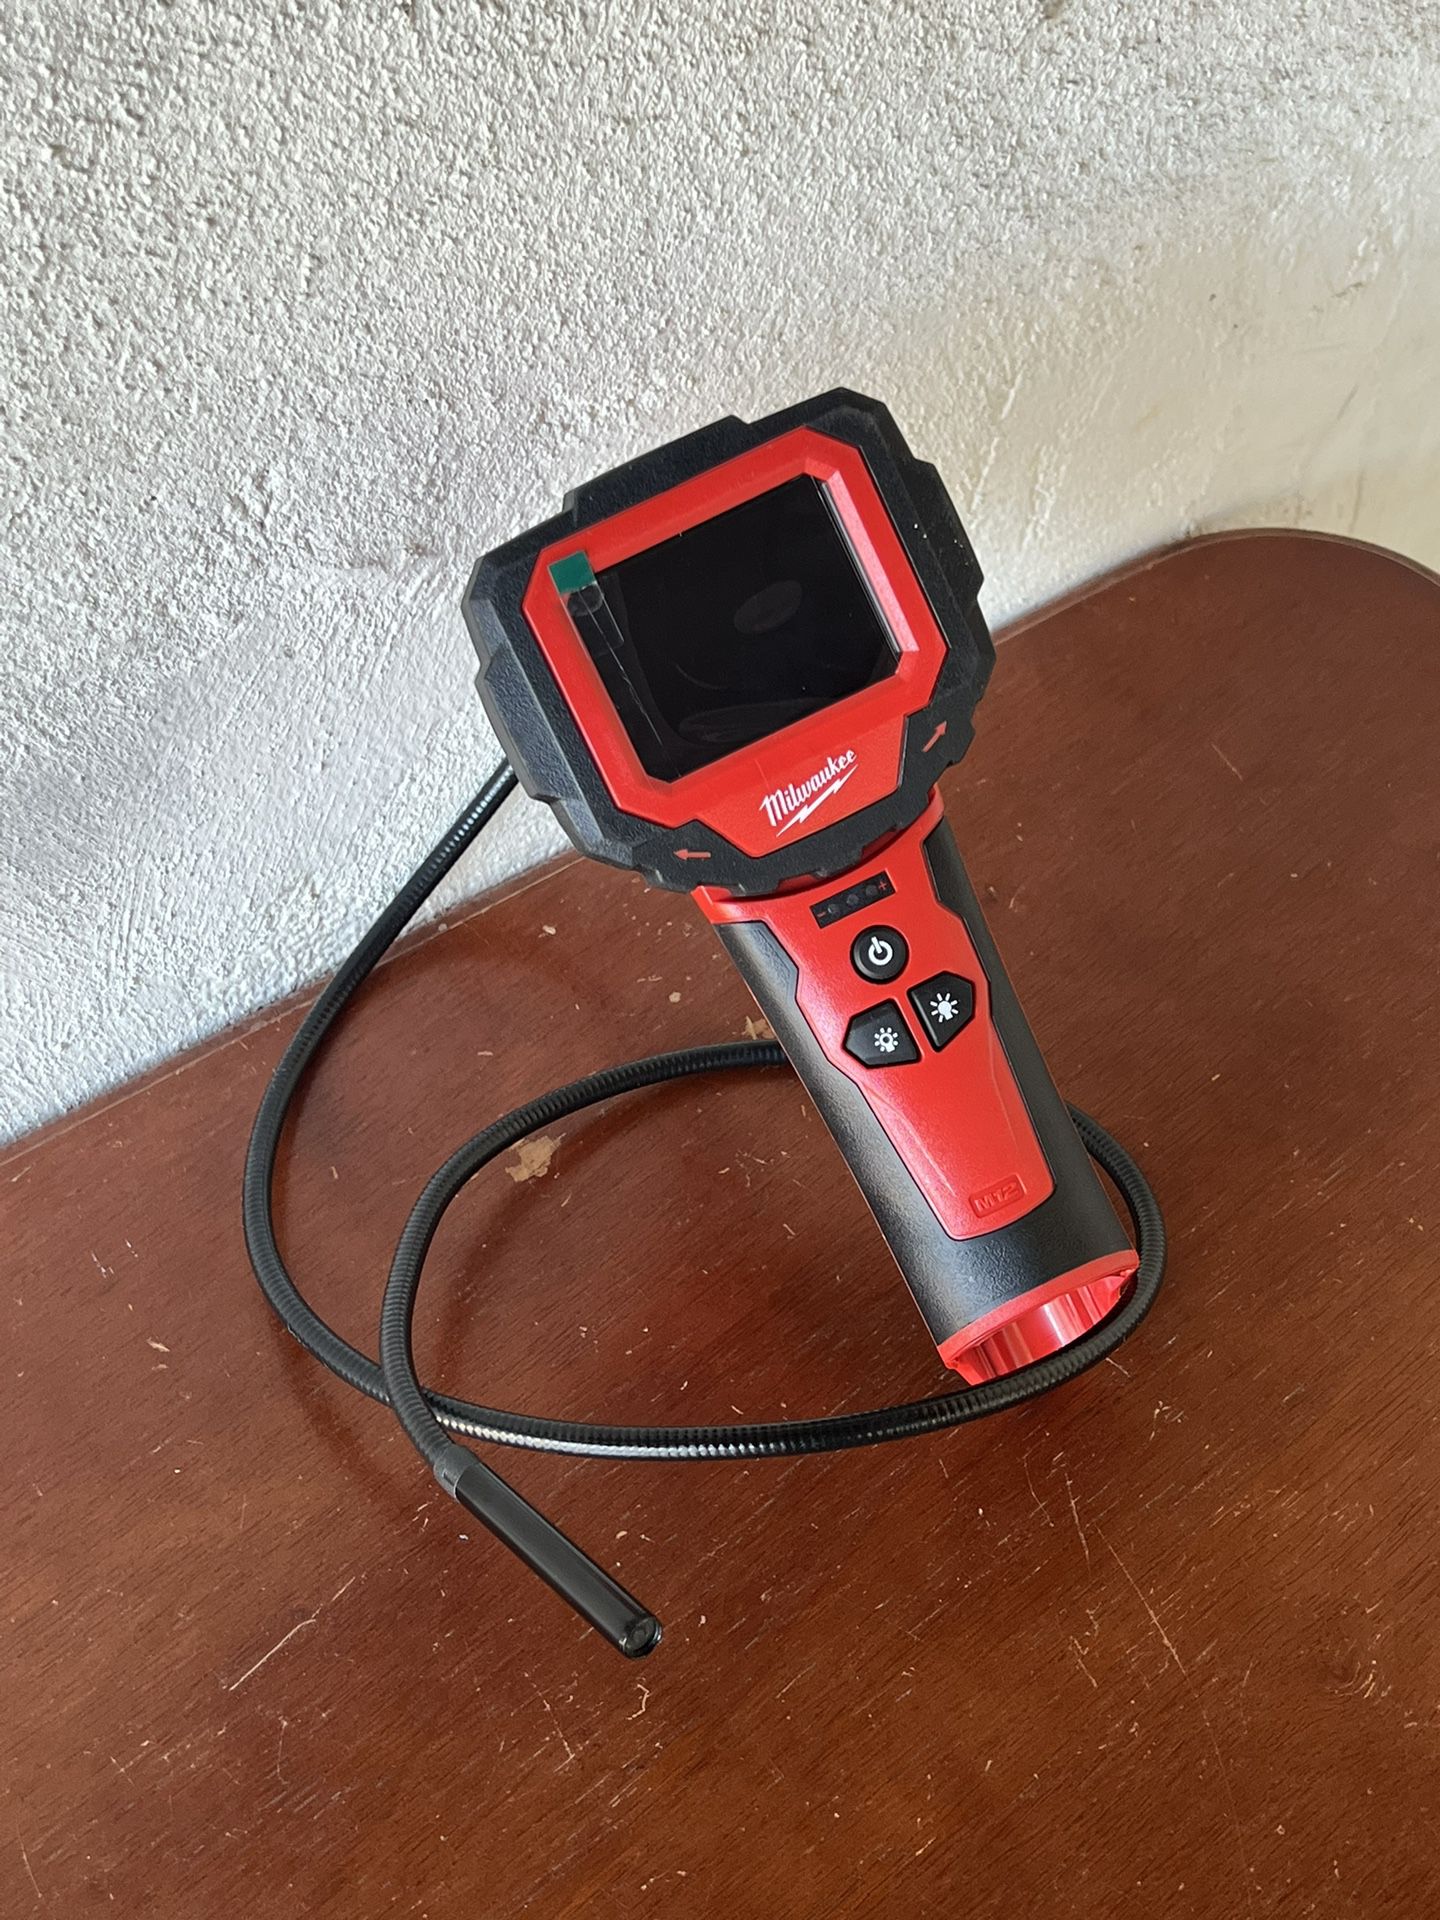 M12 12-Volt Lithium-Ion Cordless M-Spector 360 Digital Inspection Camera  (Tool-Only) 2313-20 for Sale in Spring Valley, CA OfferUp